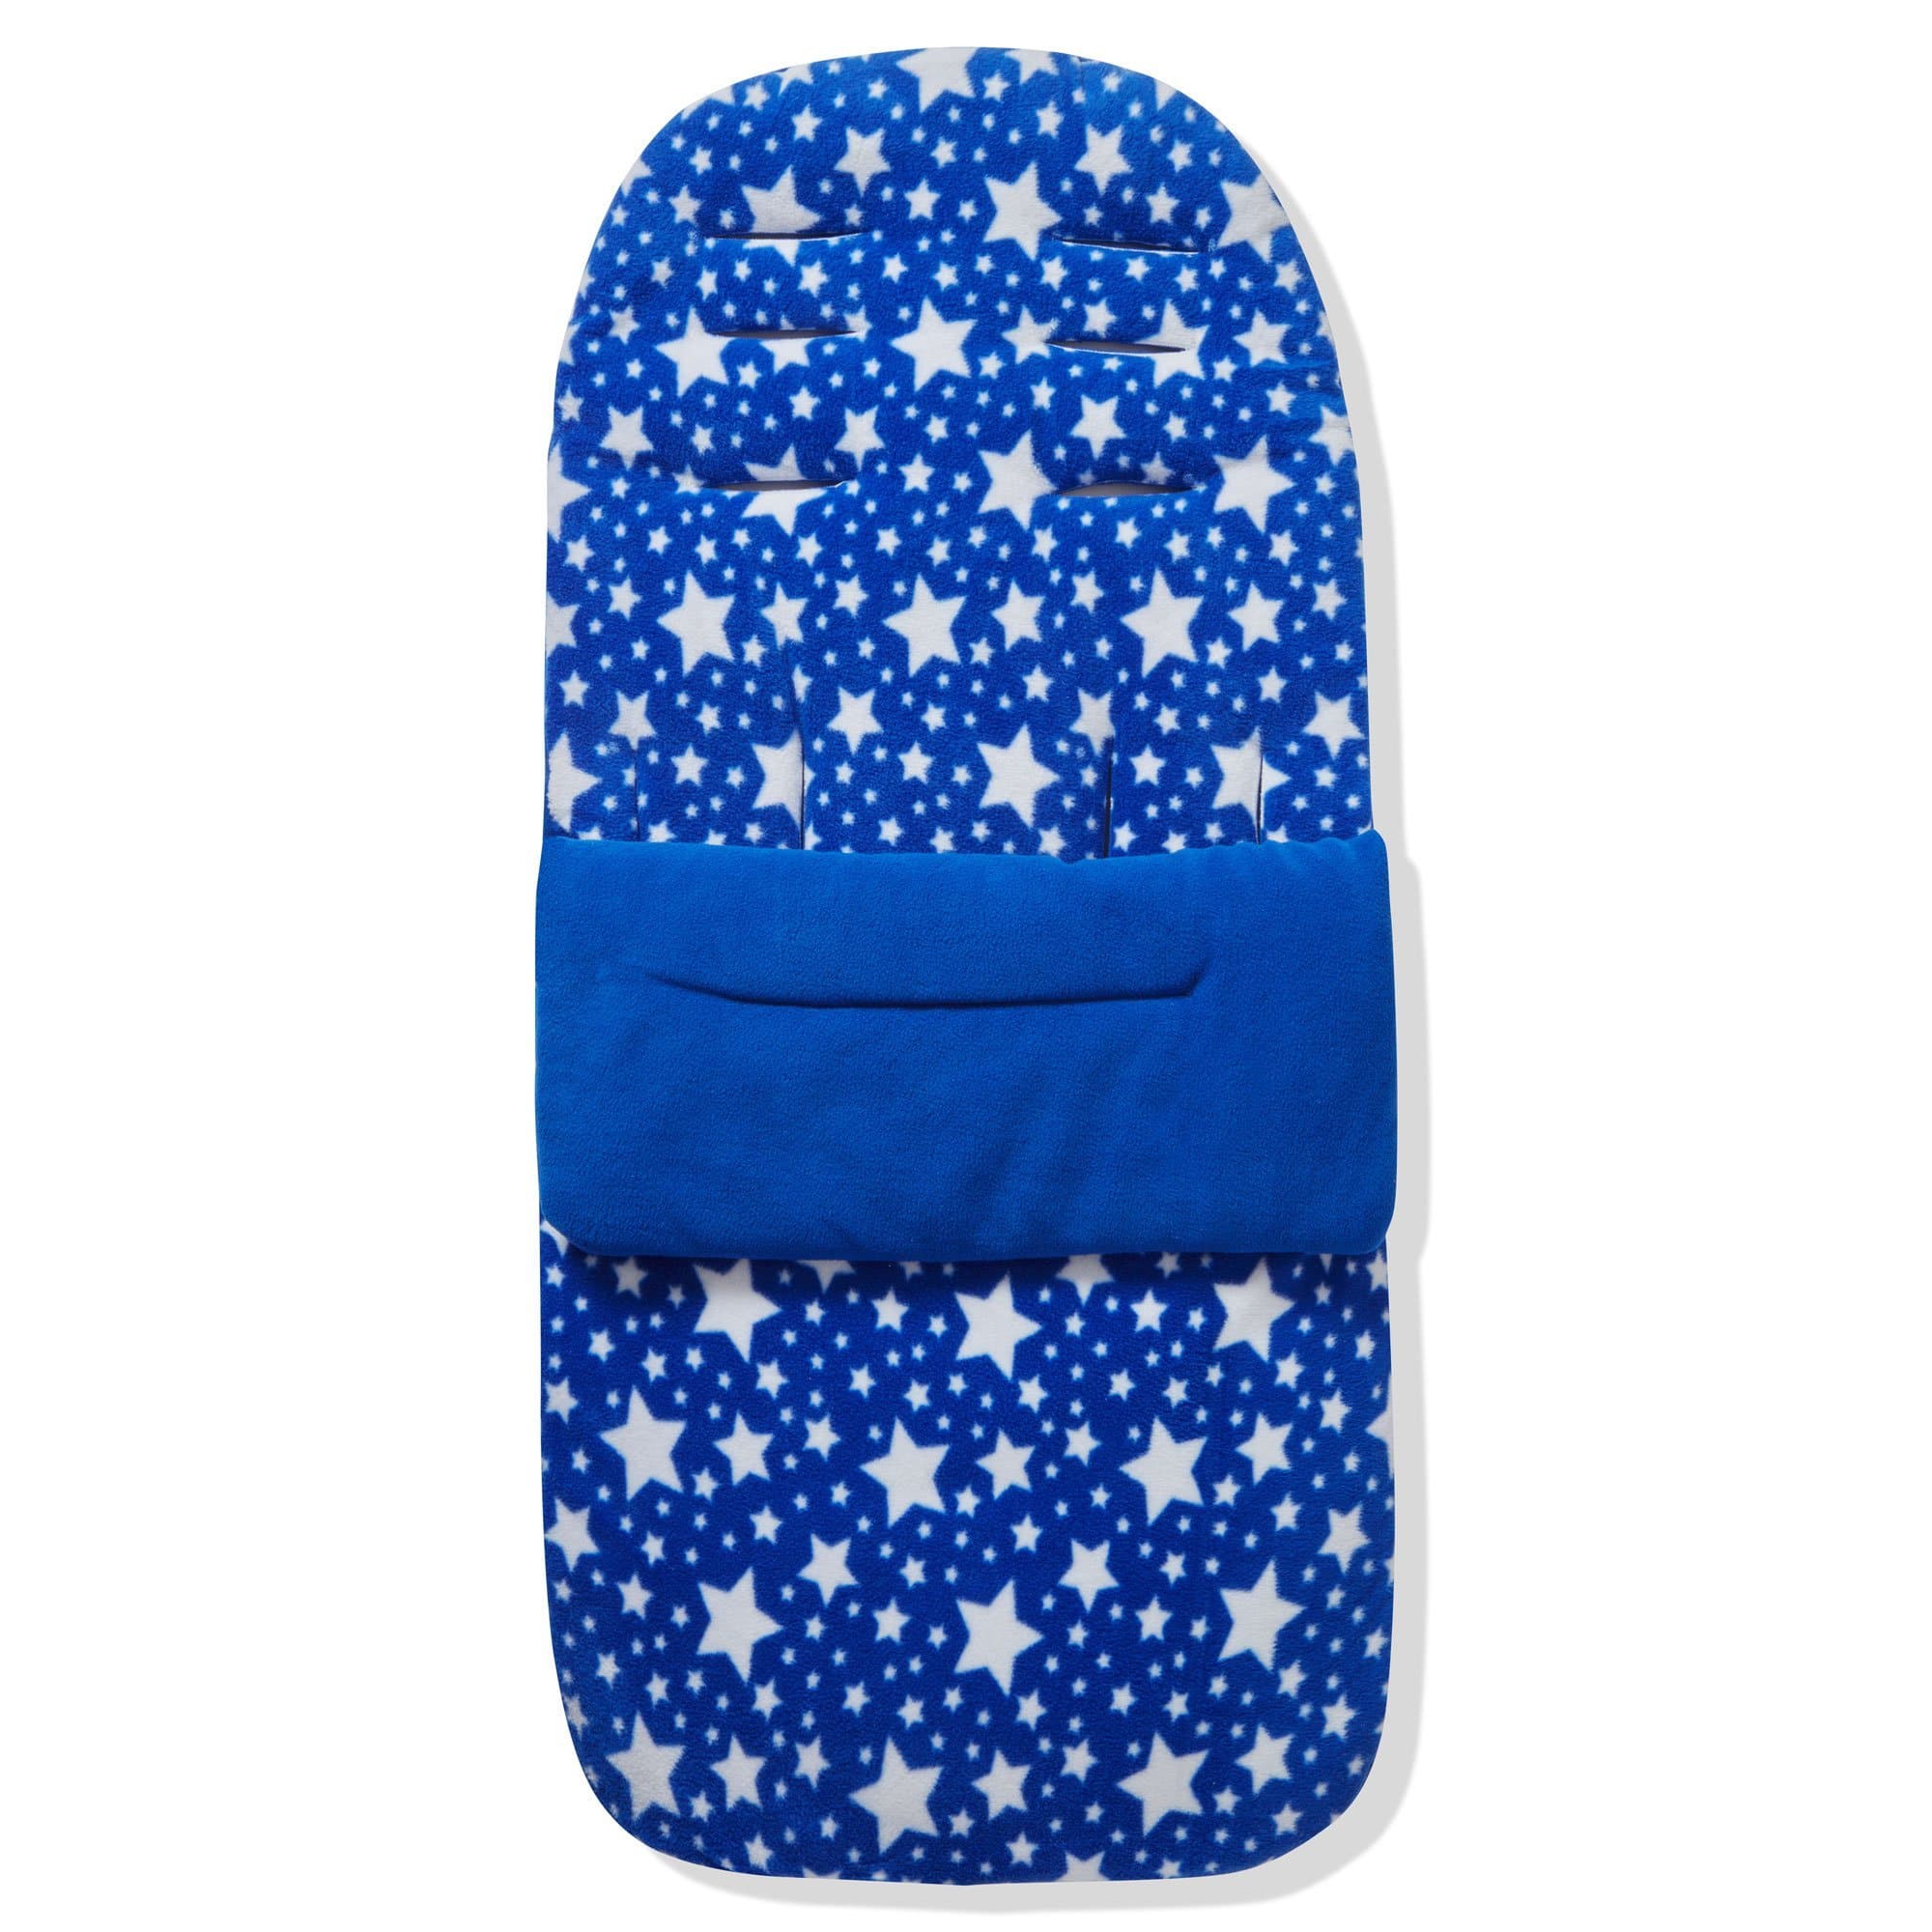 Fleece Footmuff / Cosy Toes Compatible with Noukies - For Your Little One